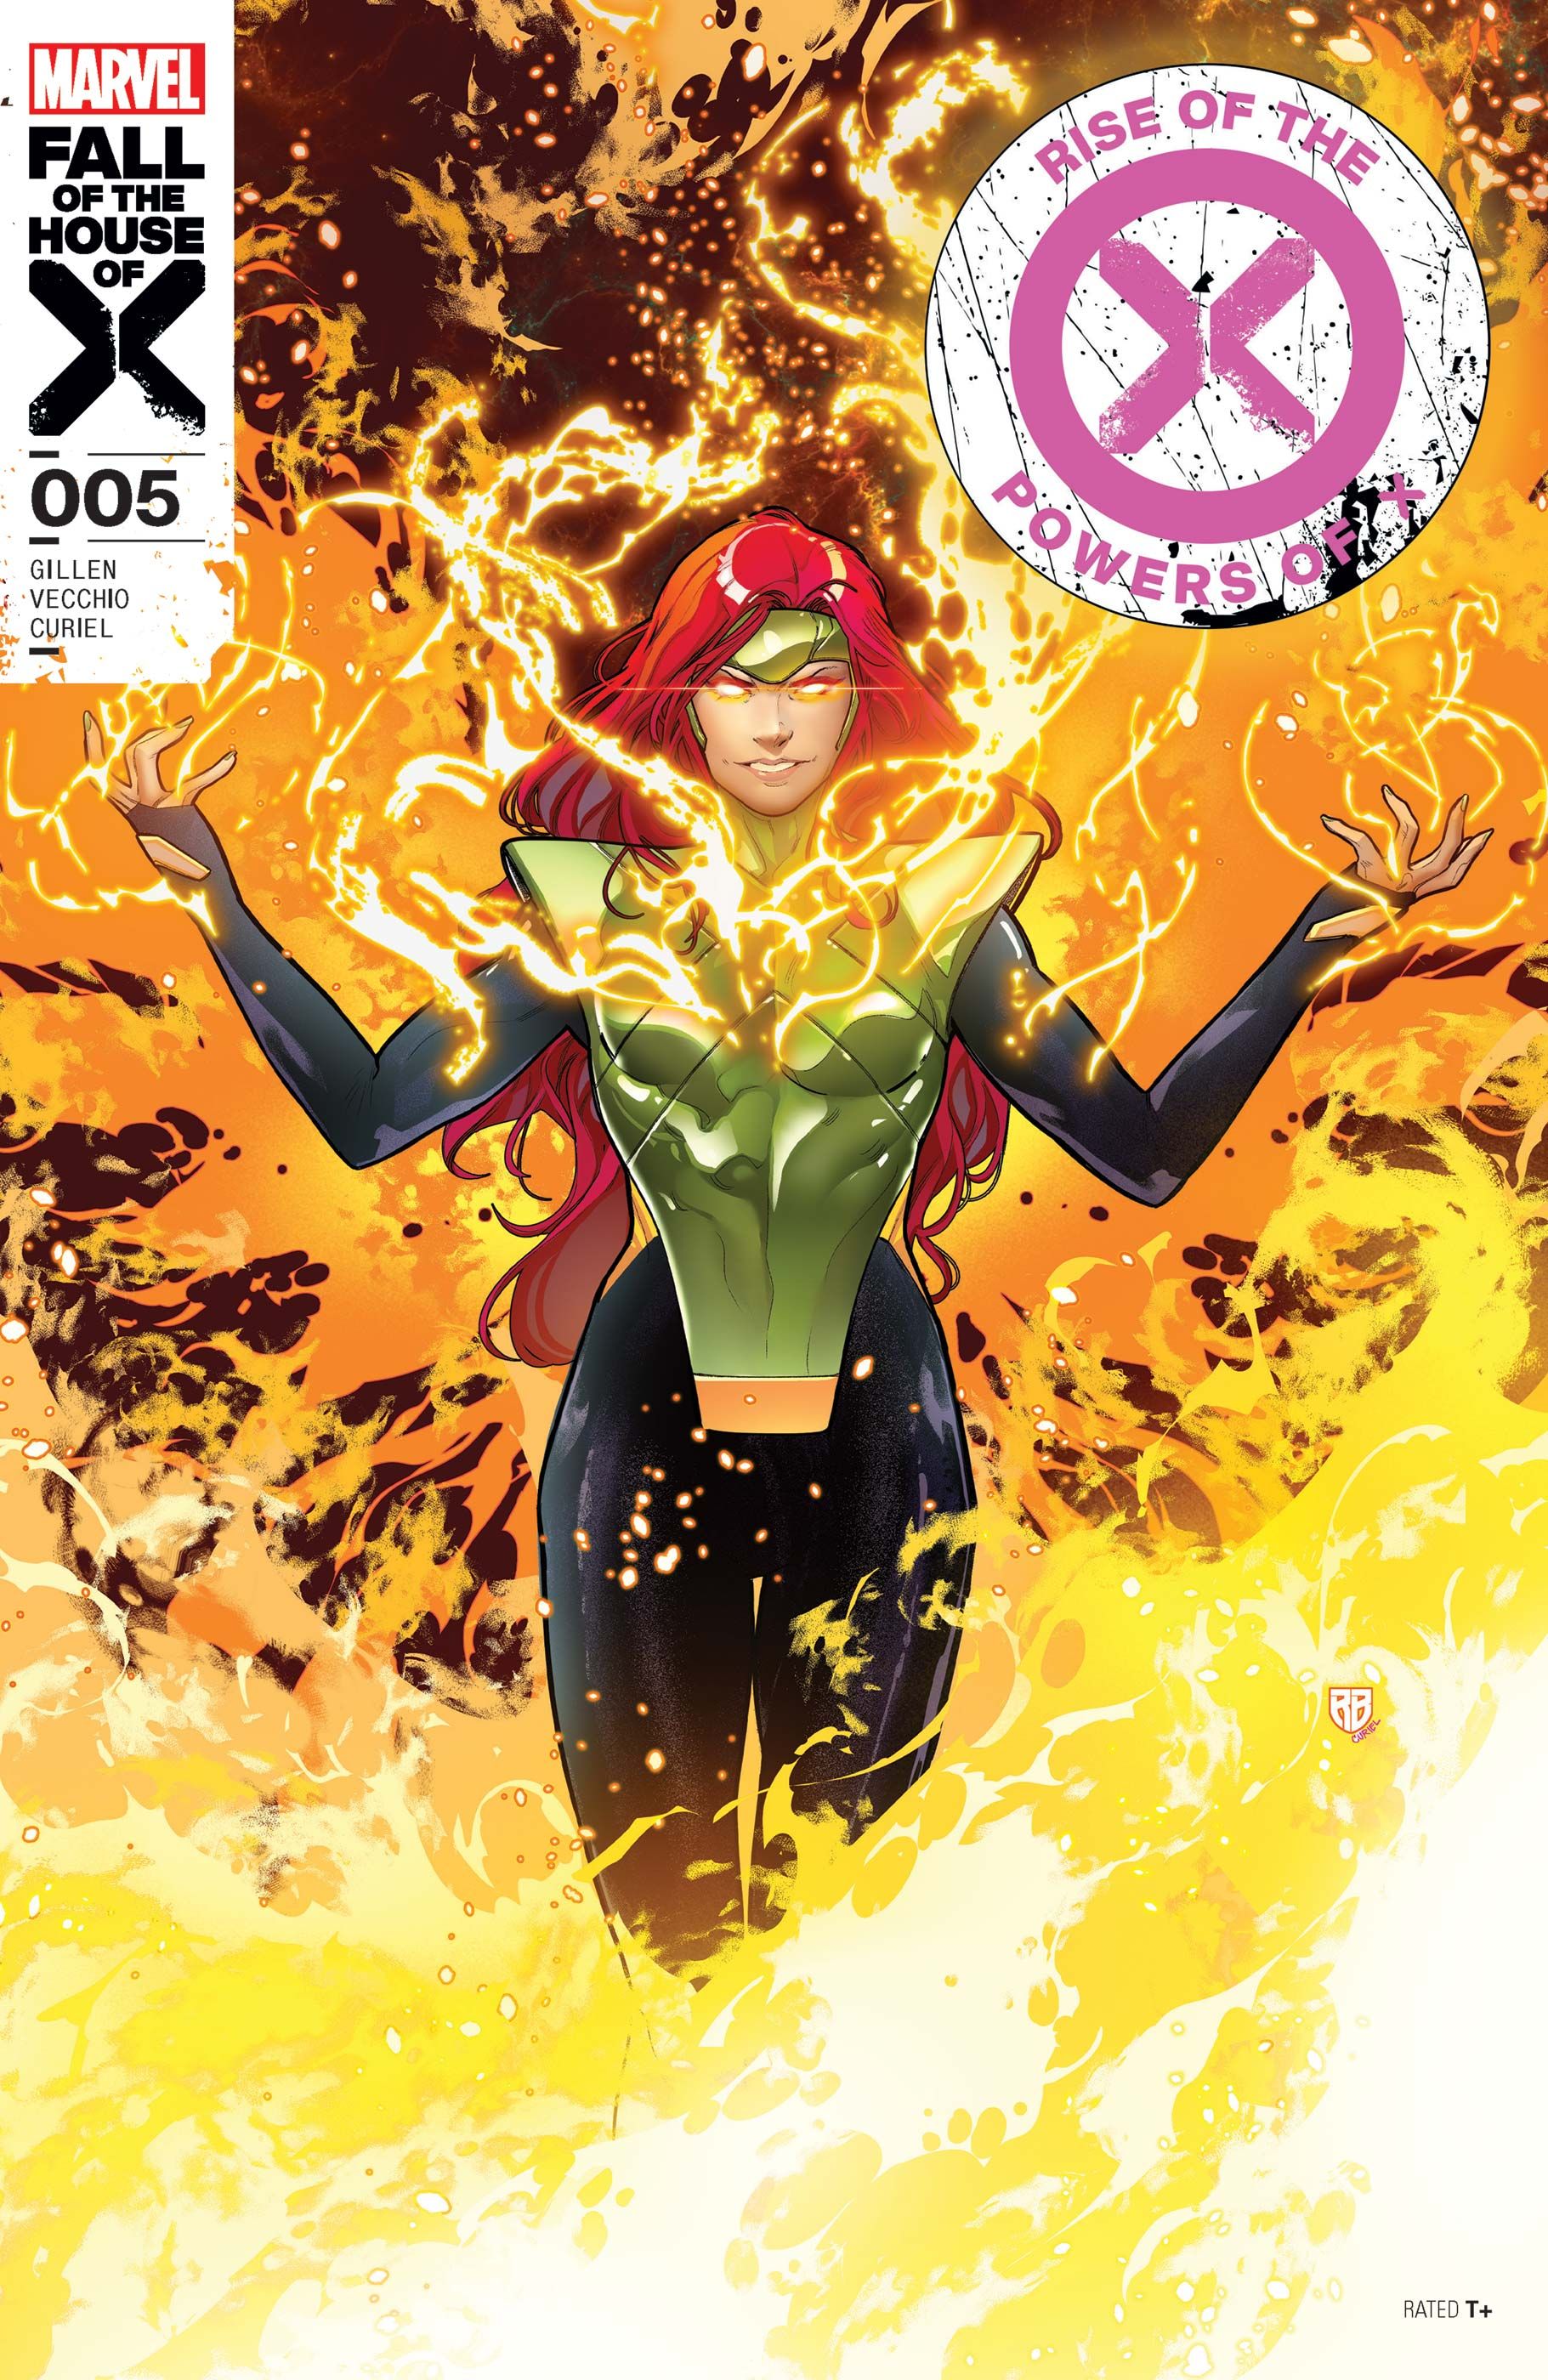 Rise of the Powers of X #5 cover, Jean Grey engulfed in the Phoenix's fire.